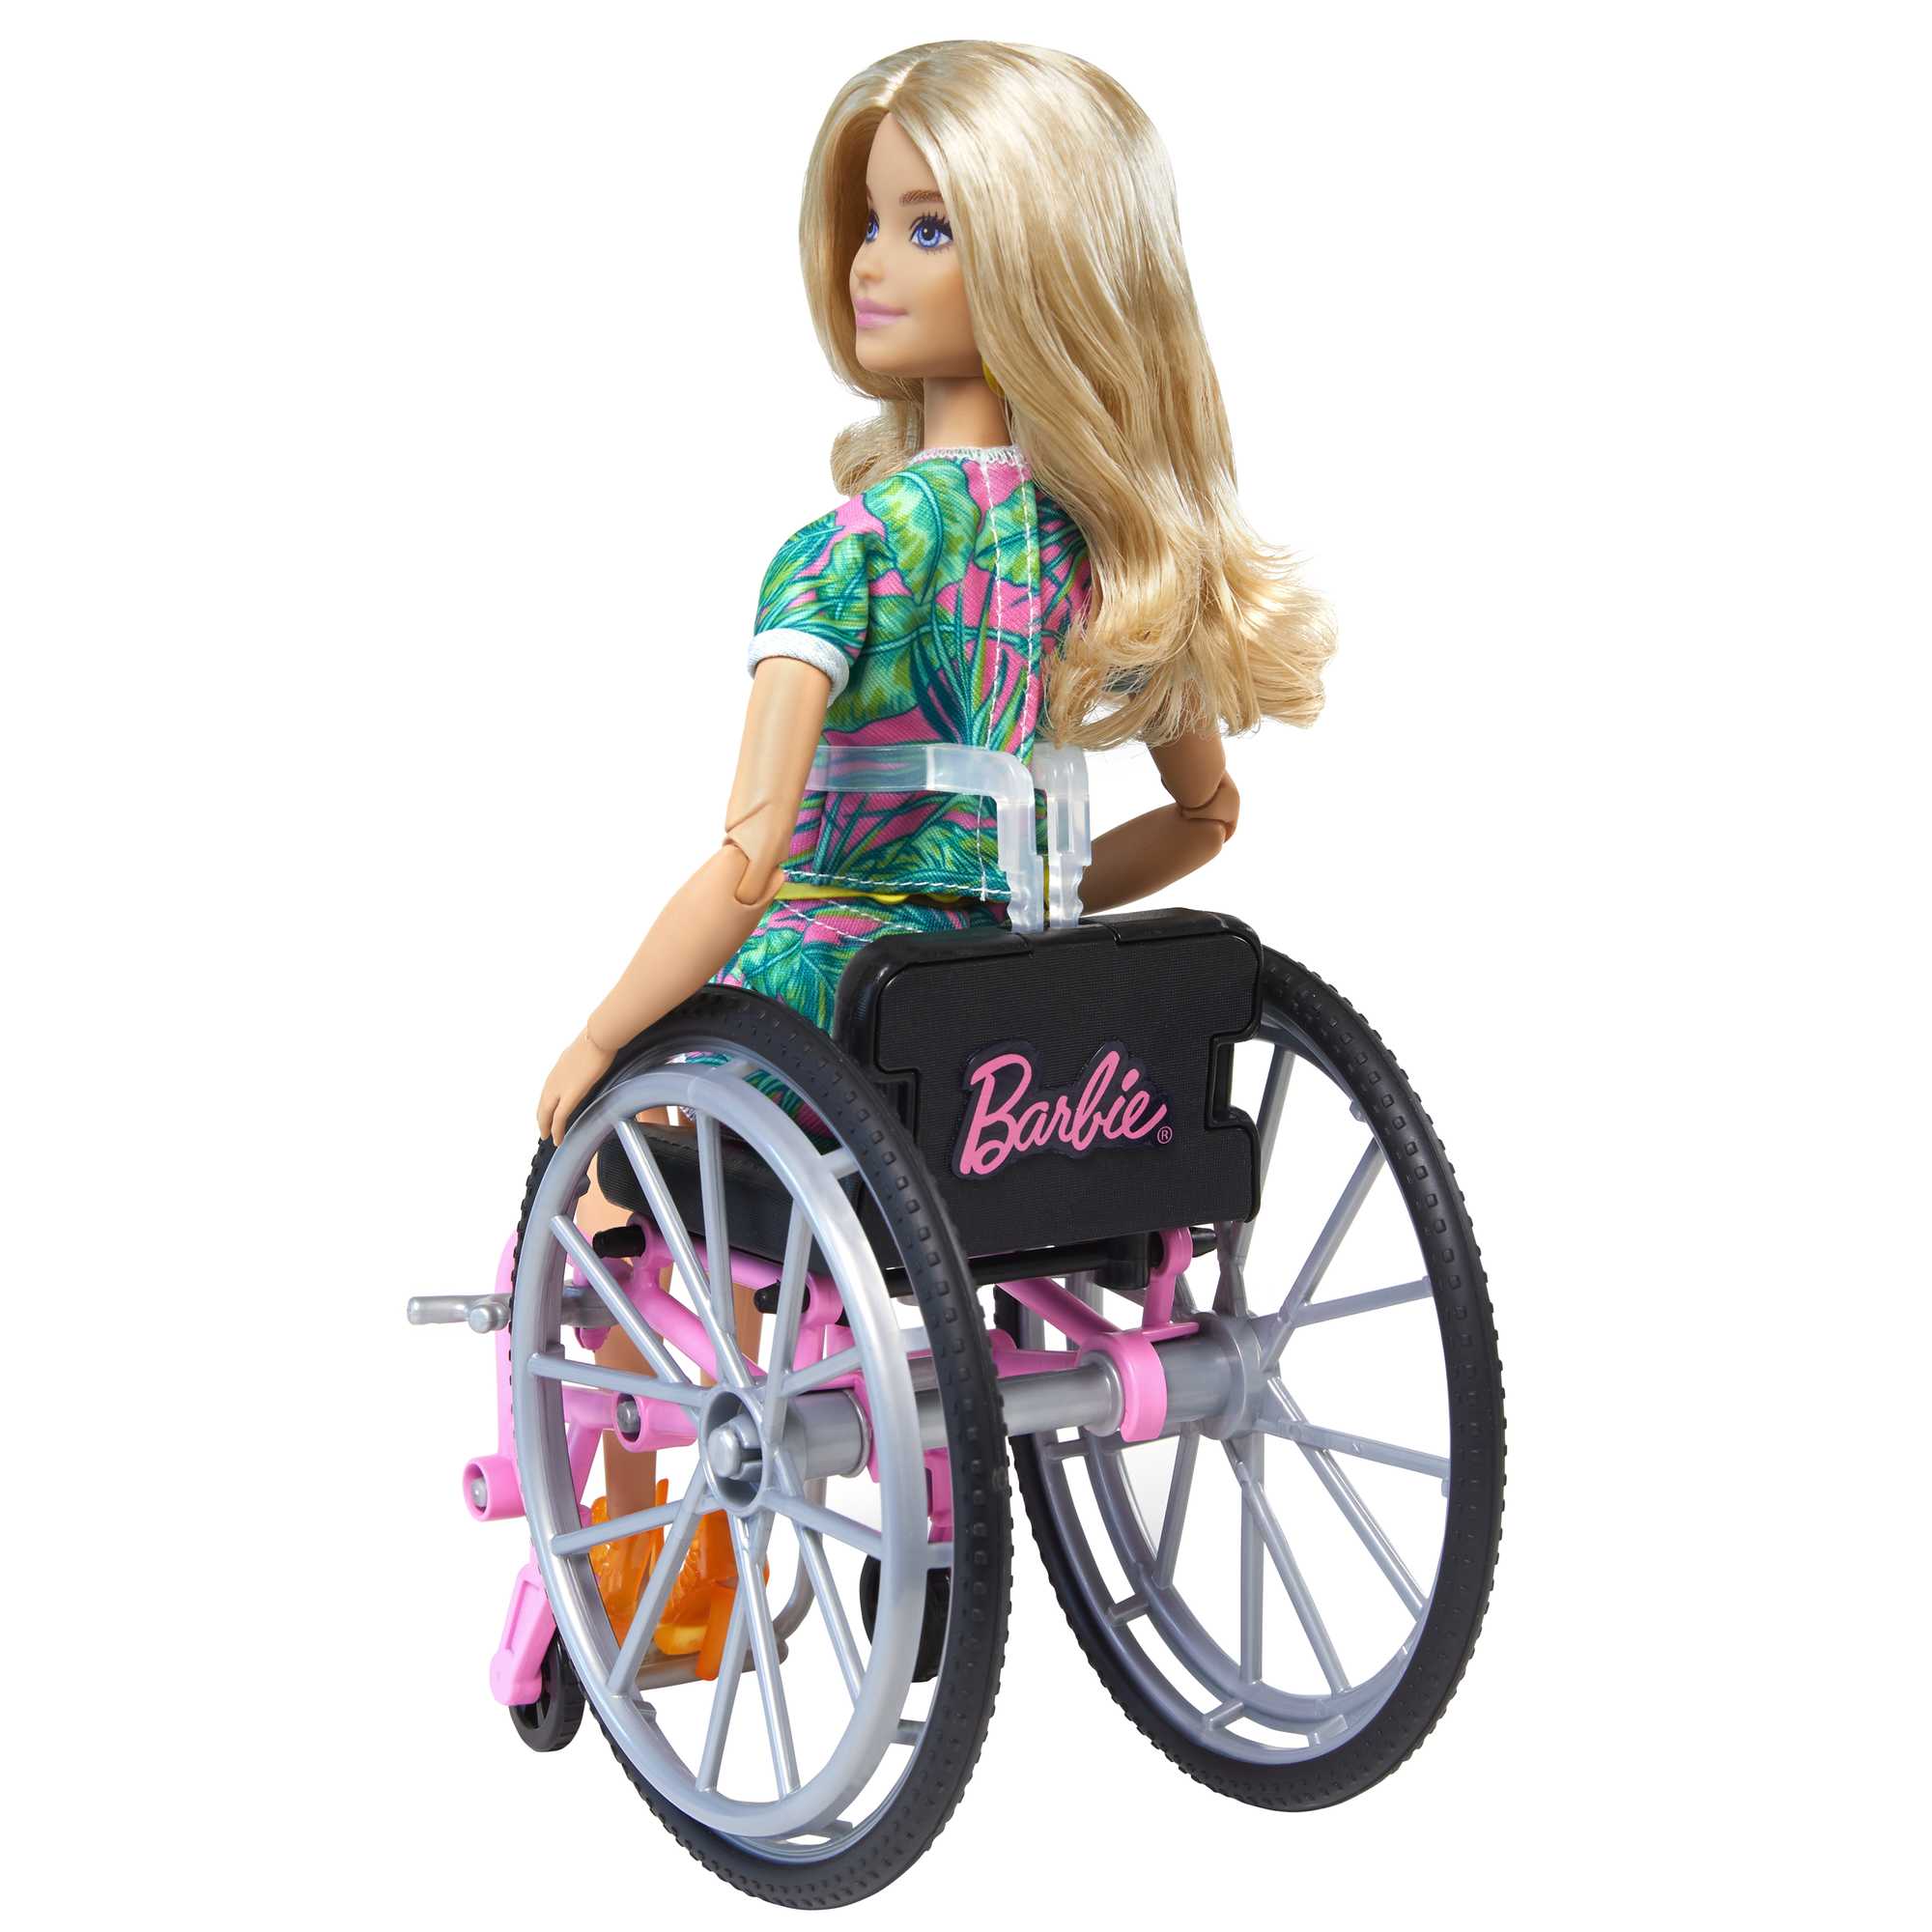 Barbie Doll and Accessory #165 | Mattel